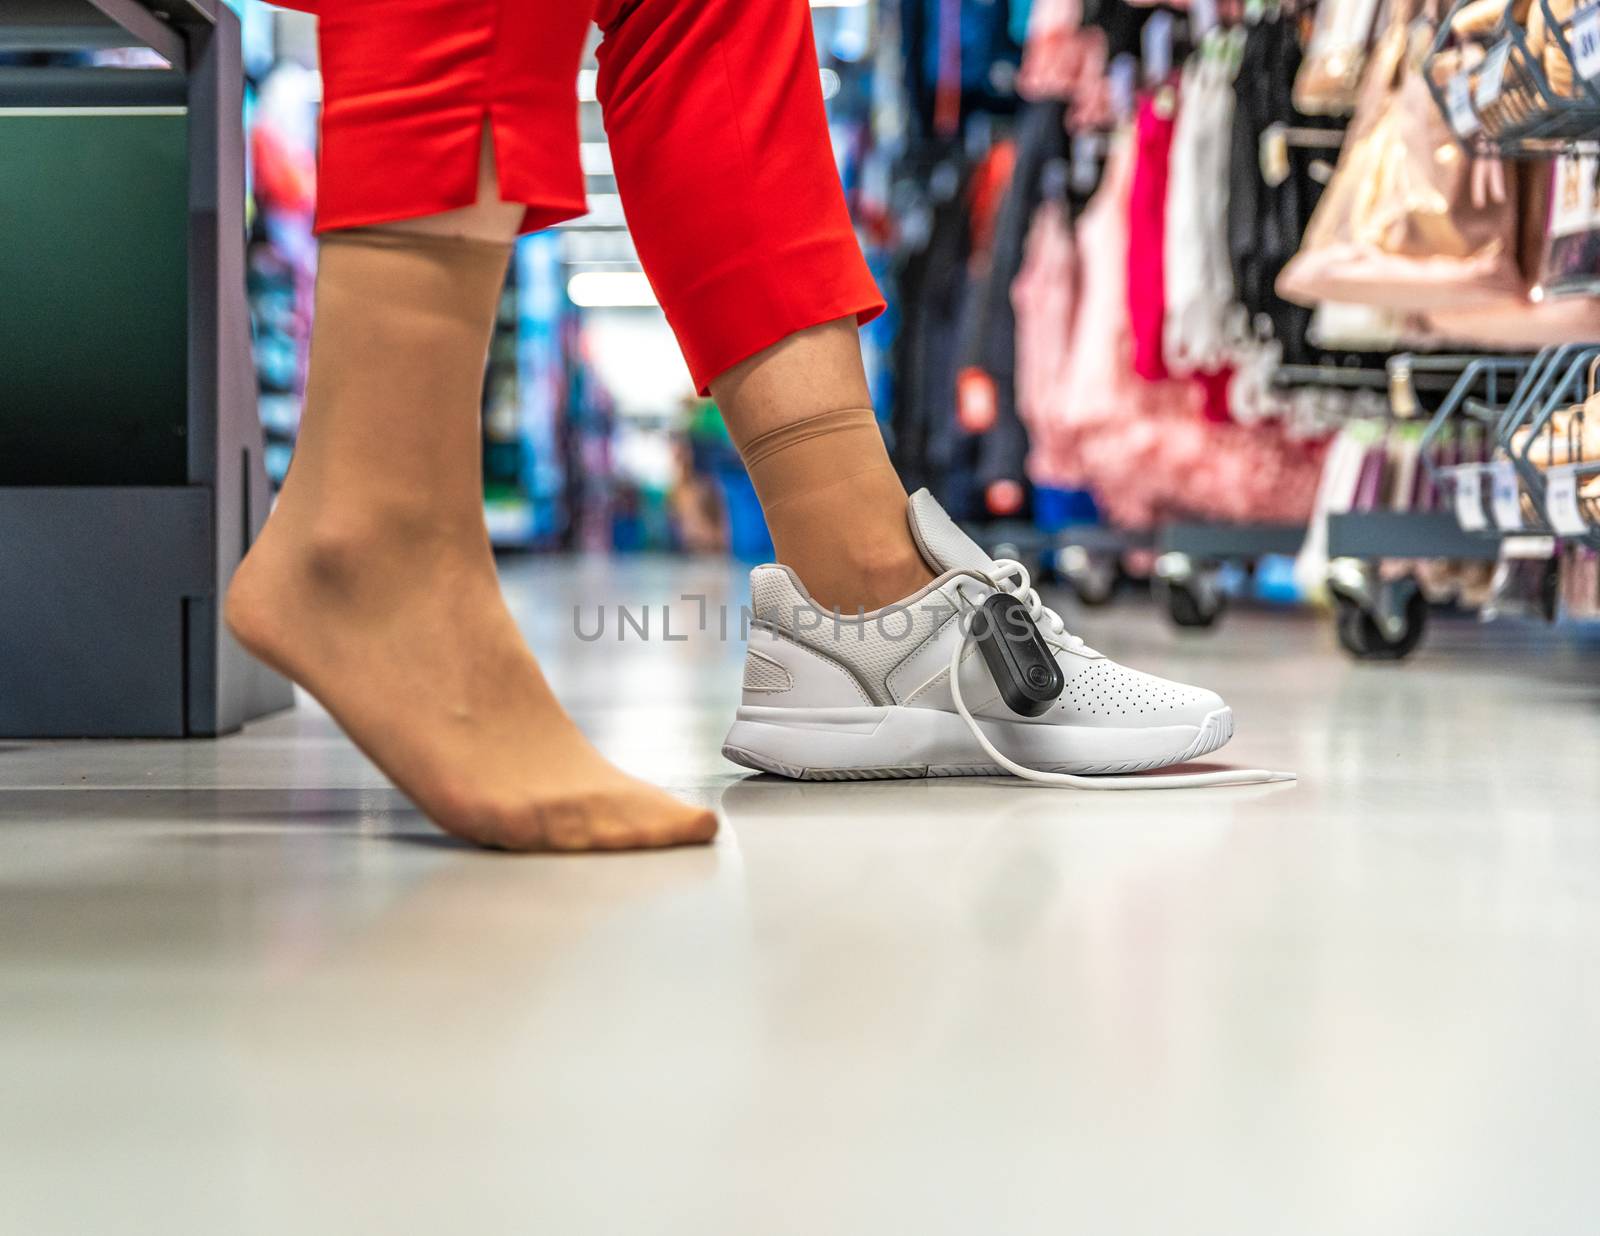 woman chooses and tries sports shoes in the store.